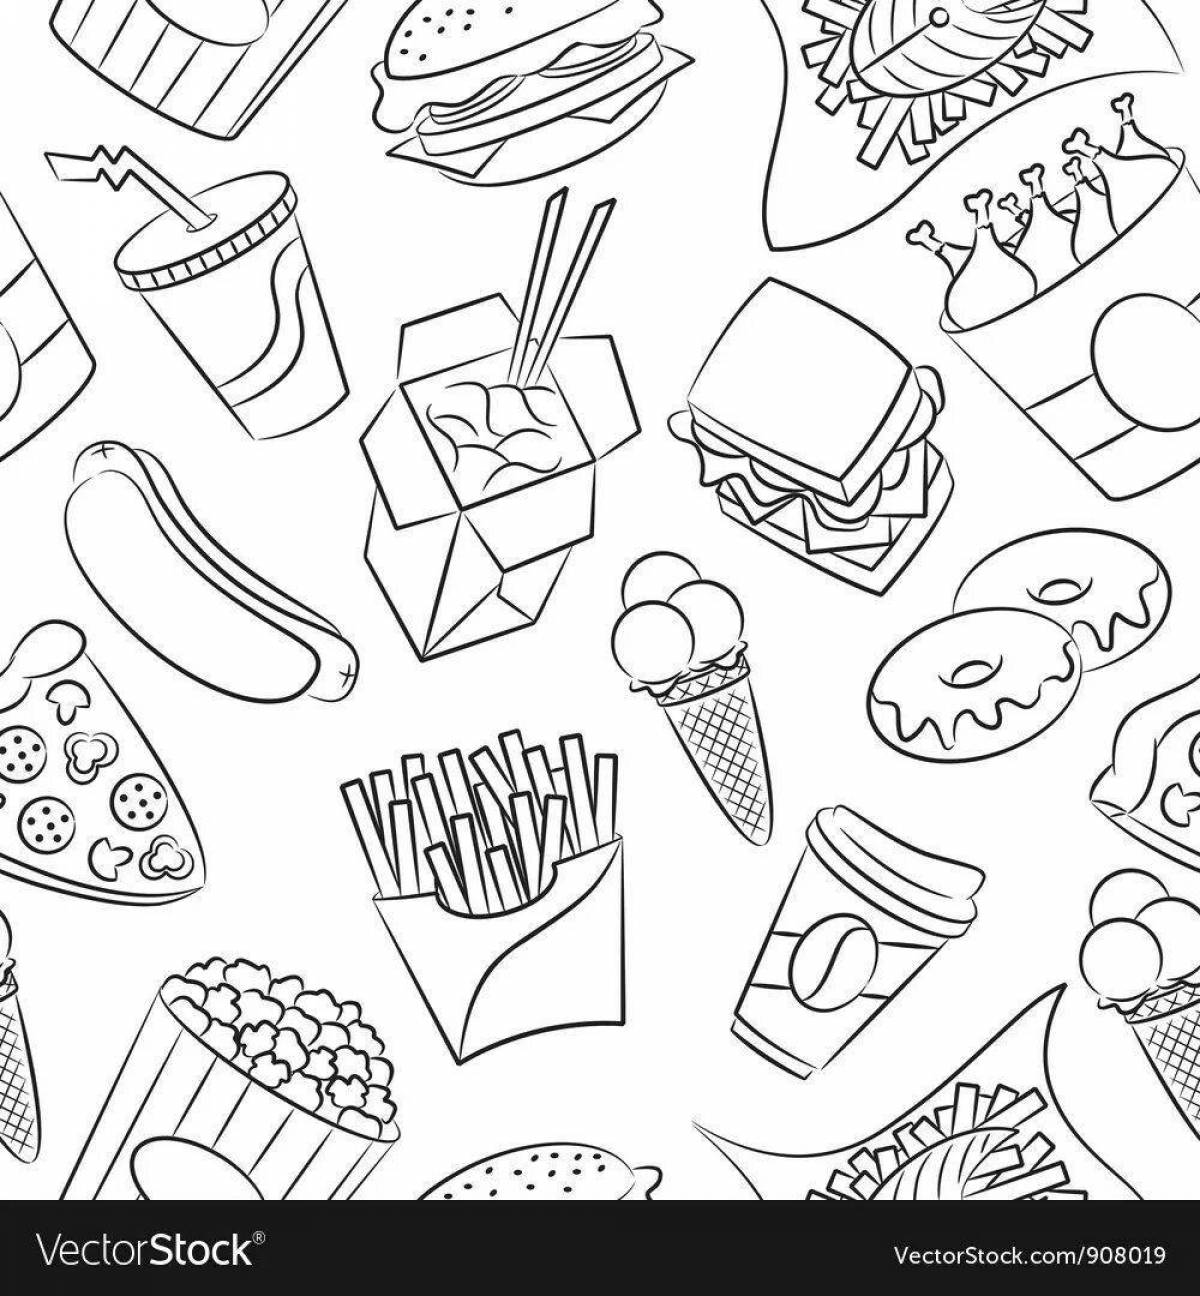 Adorable food stickers coloring pages